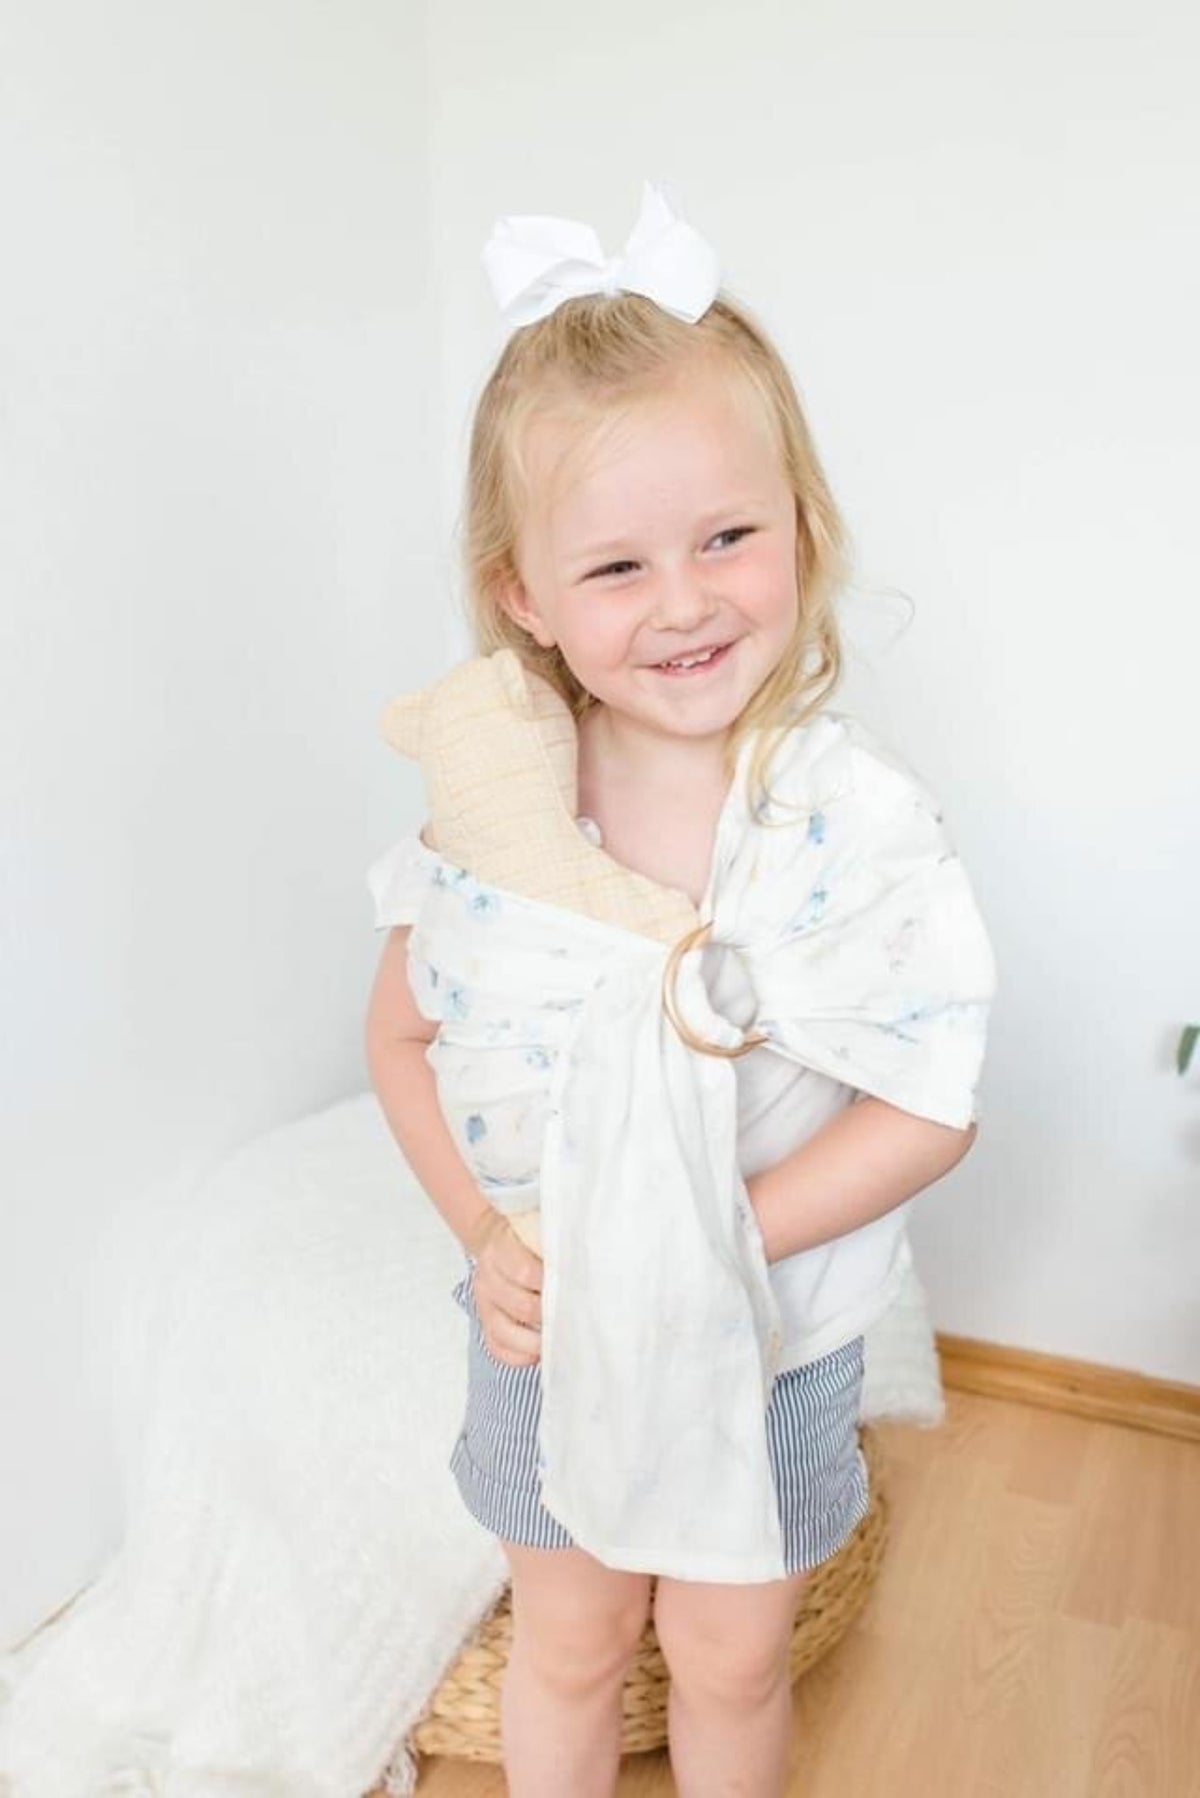 Young girl using white and blue play ring sling